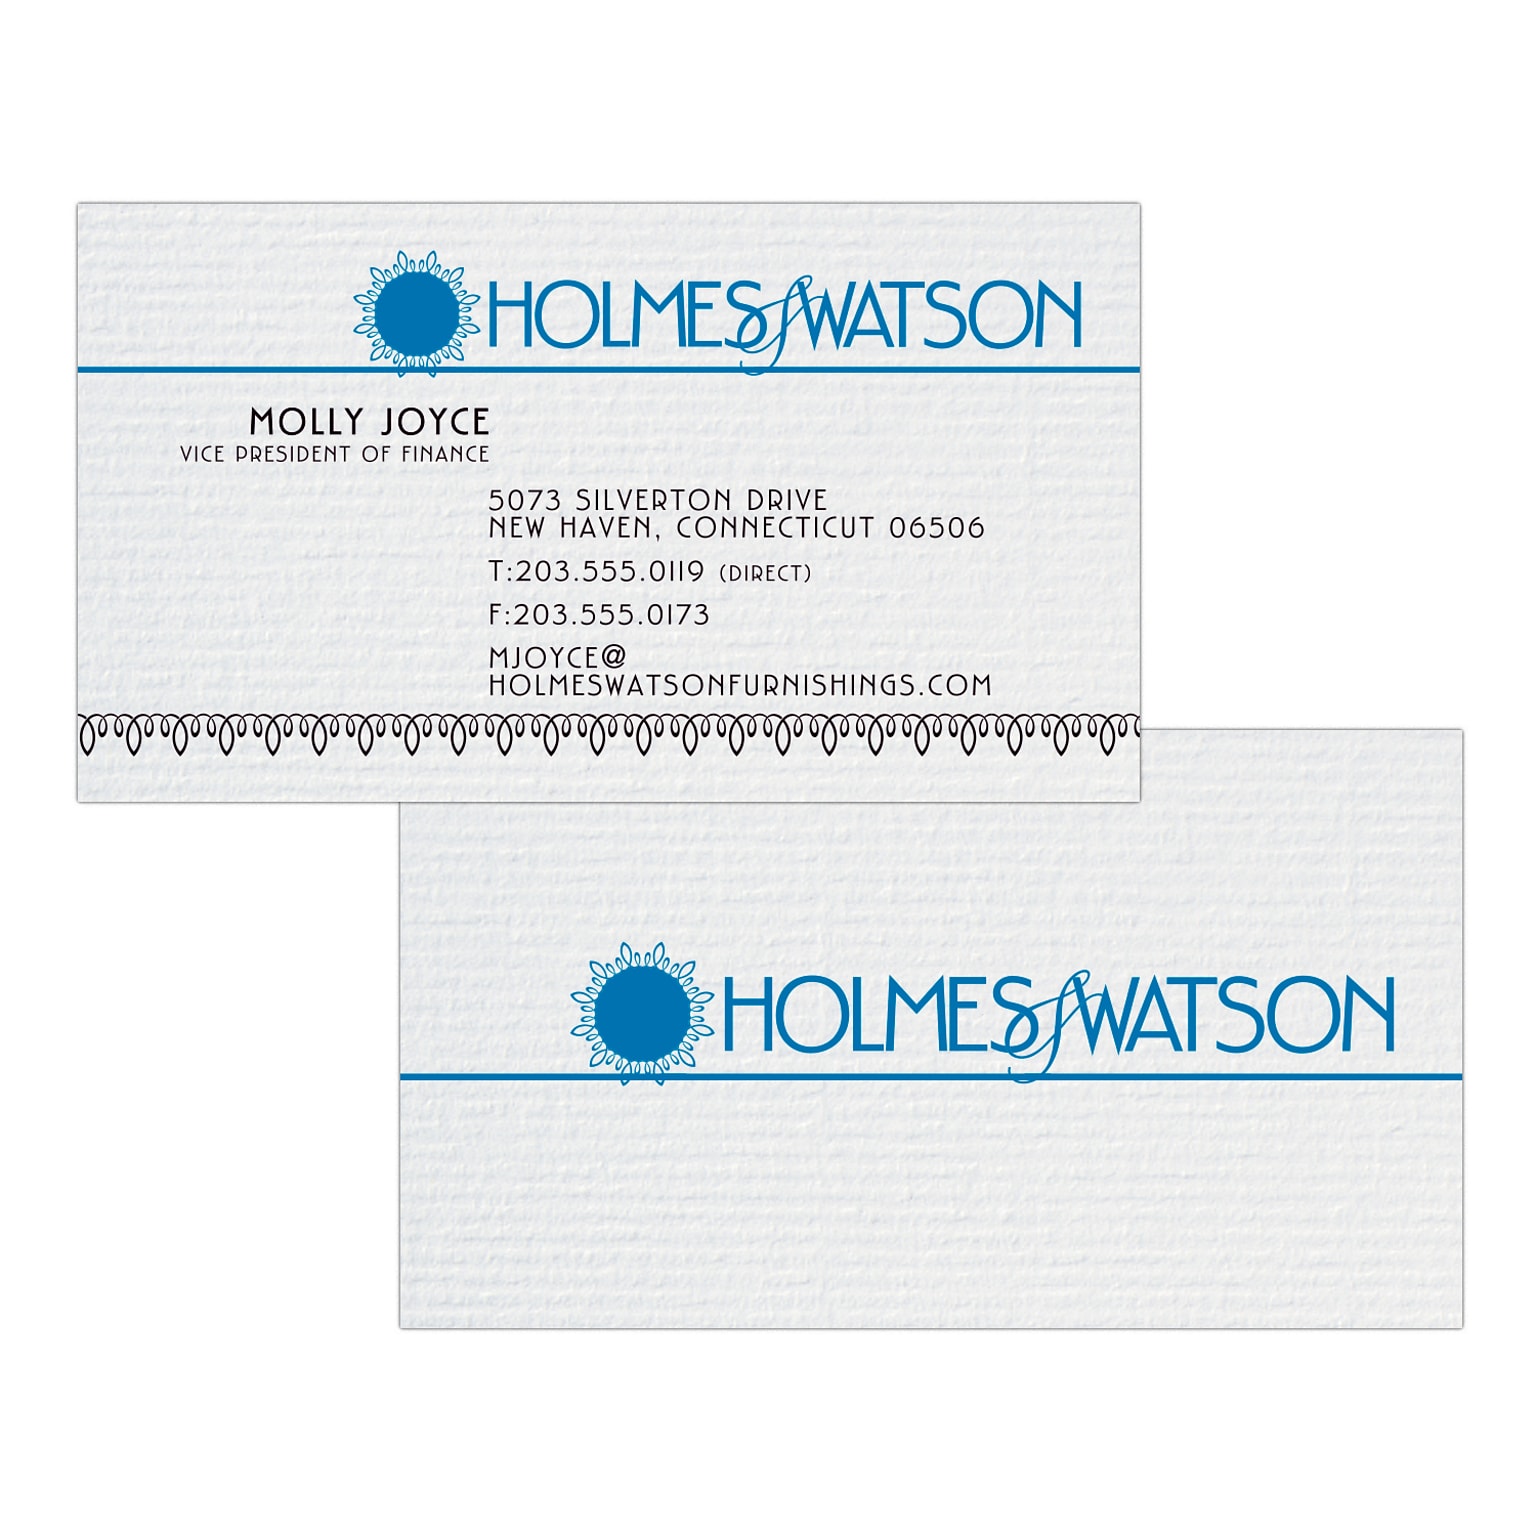 Custom 1-2 Color Business Cards, CLASSIC® Laid Solar White 120#, Flat Print, 2 Standard Inks, 2-Sided, 250/PK